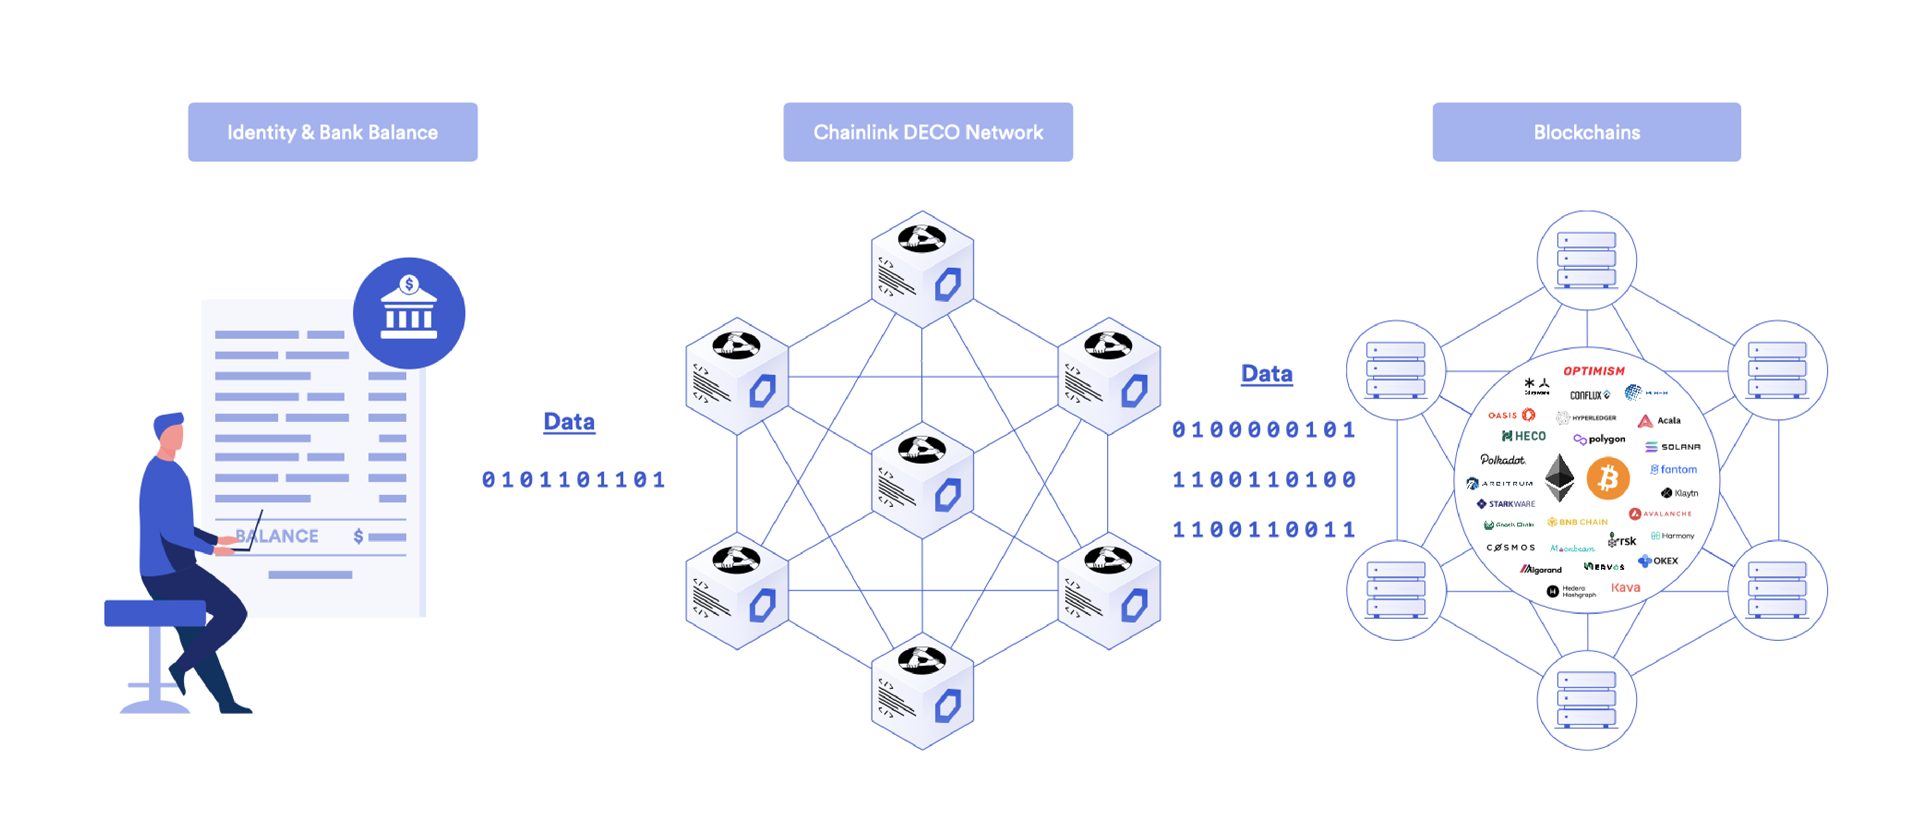 A simple diagram showing how Chainlink DECO preserves data privacy.